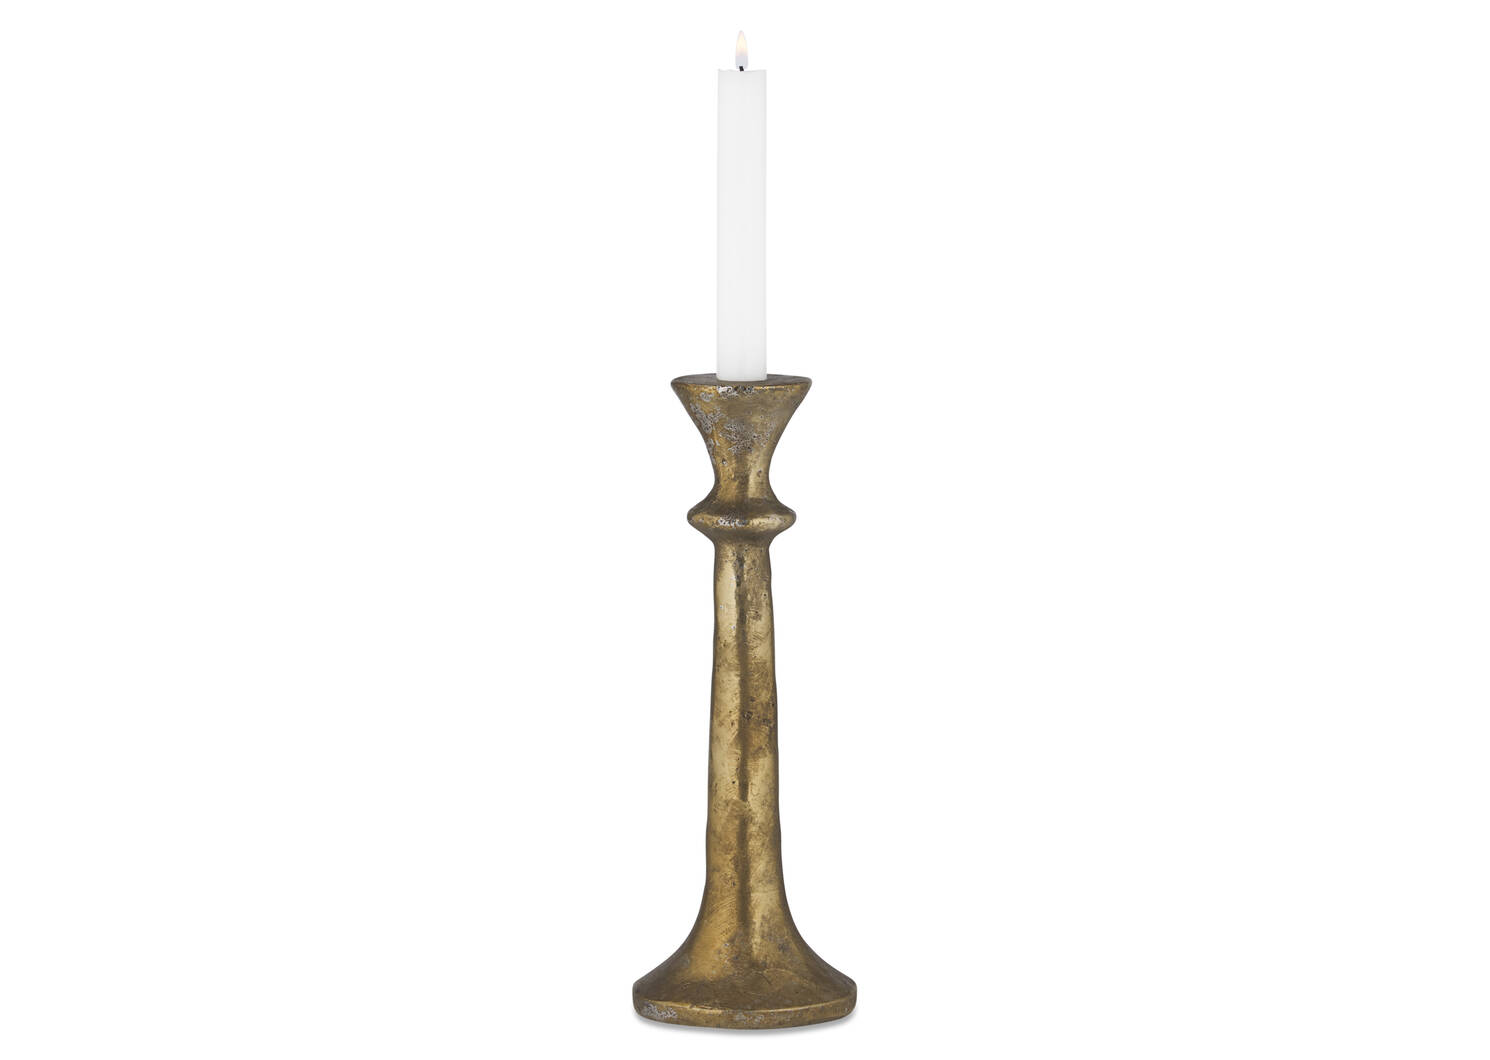 Harlan Candle Holders